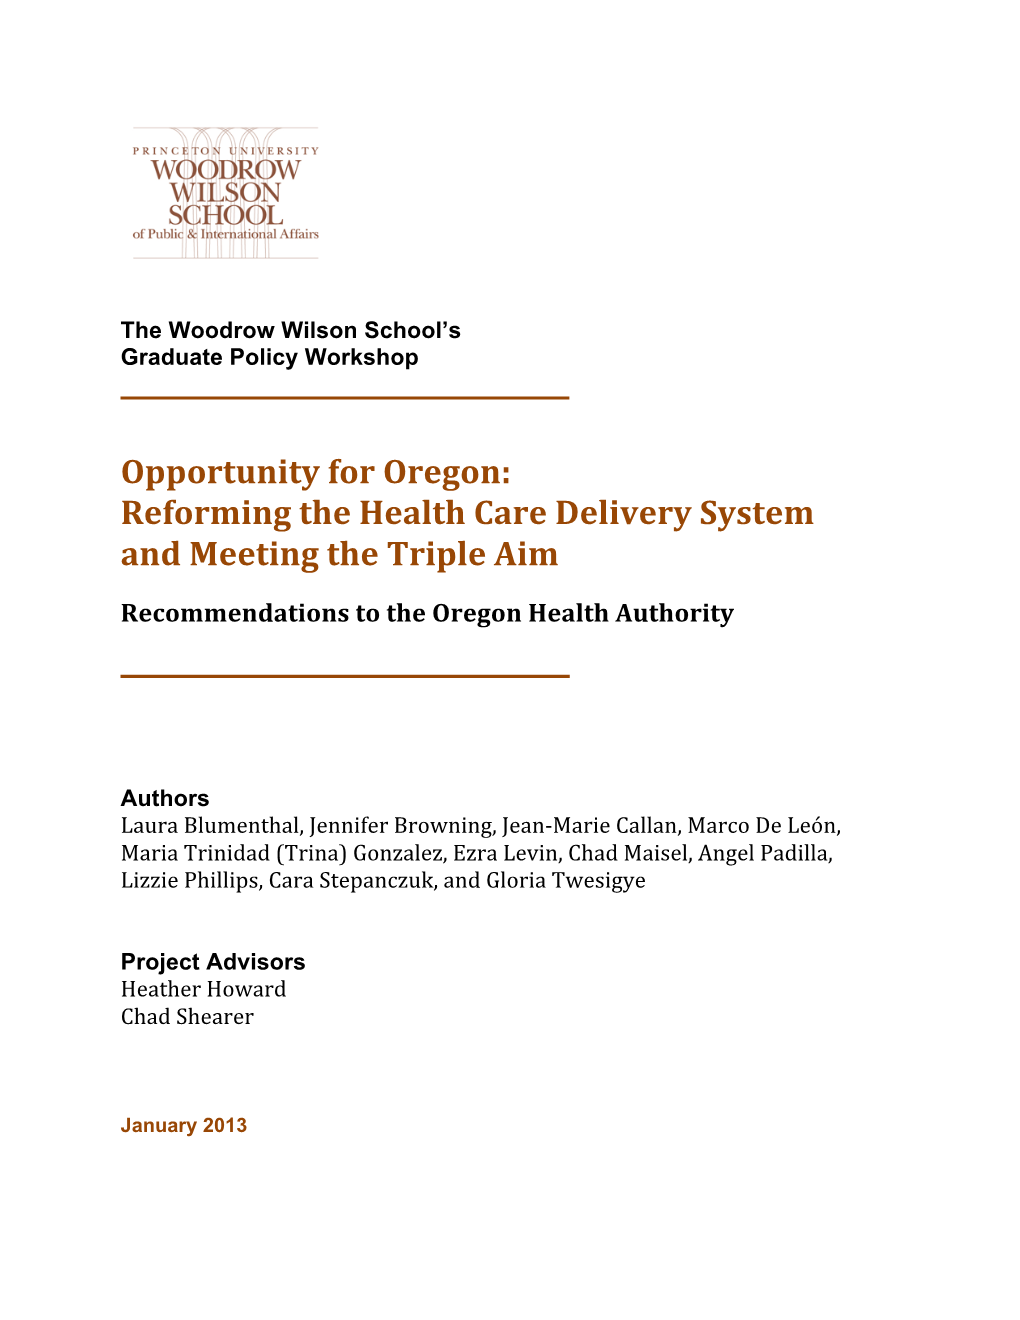 Opportunity for Oregon: Reforming the Health Care Delivery System and Meeting the Triple Aim